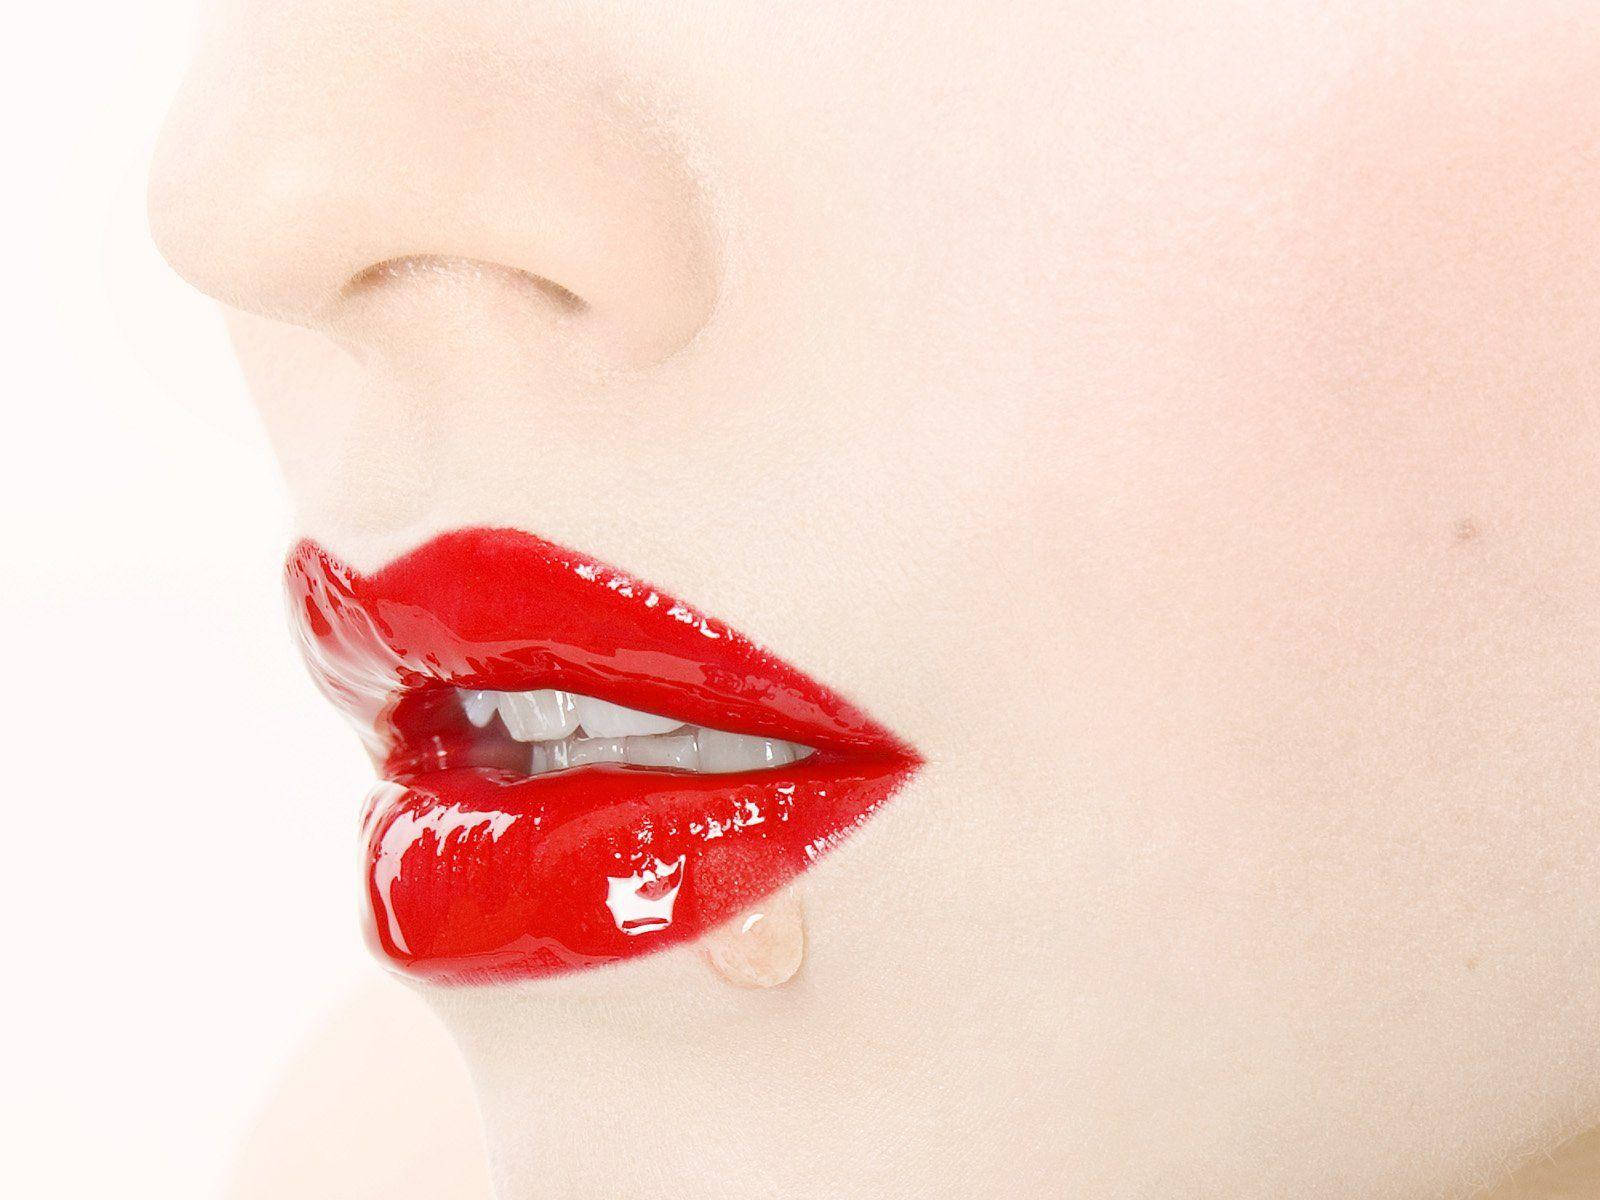 Download White Woman's Face With Red Watery Lips Wallpaper | Wallpapers.com